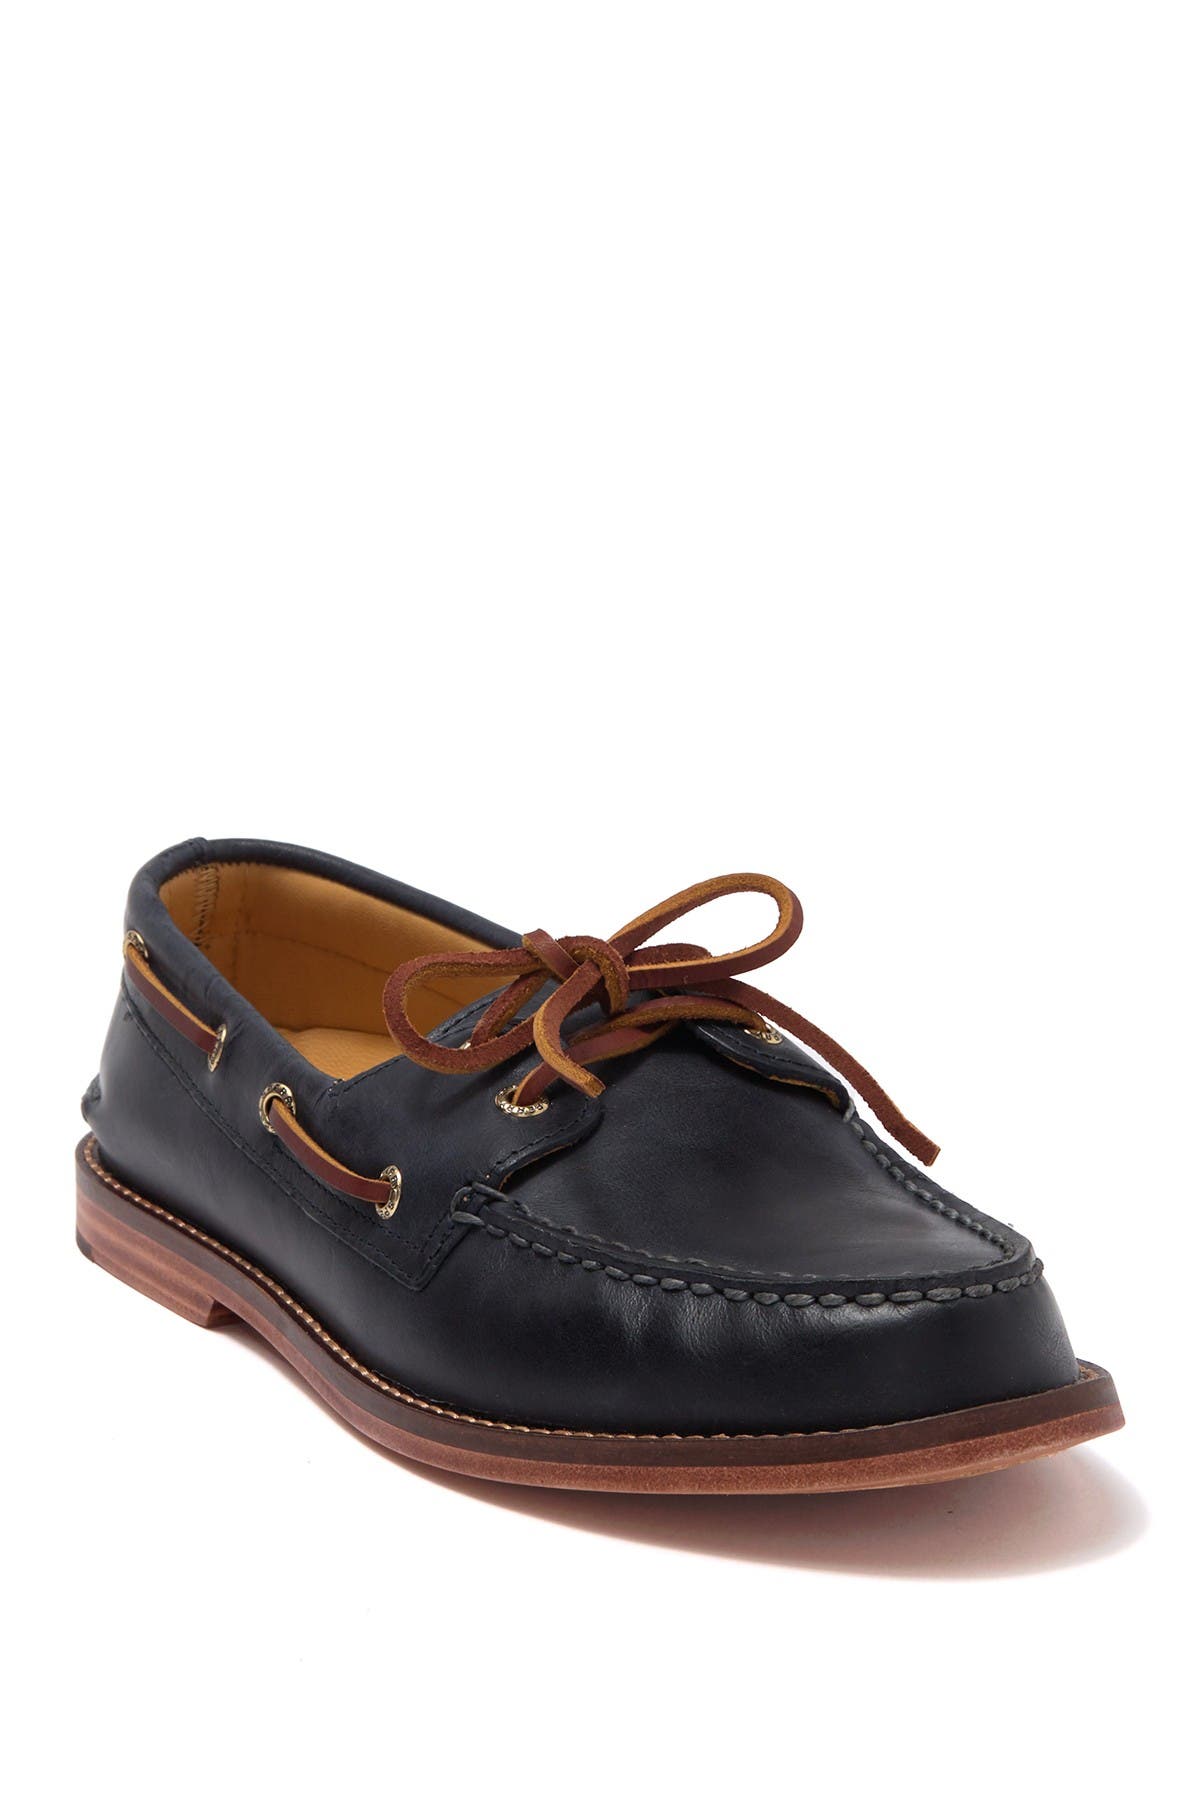 sperry gold cup nordstrom